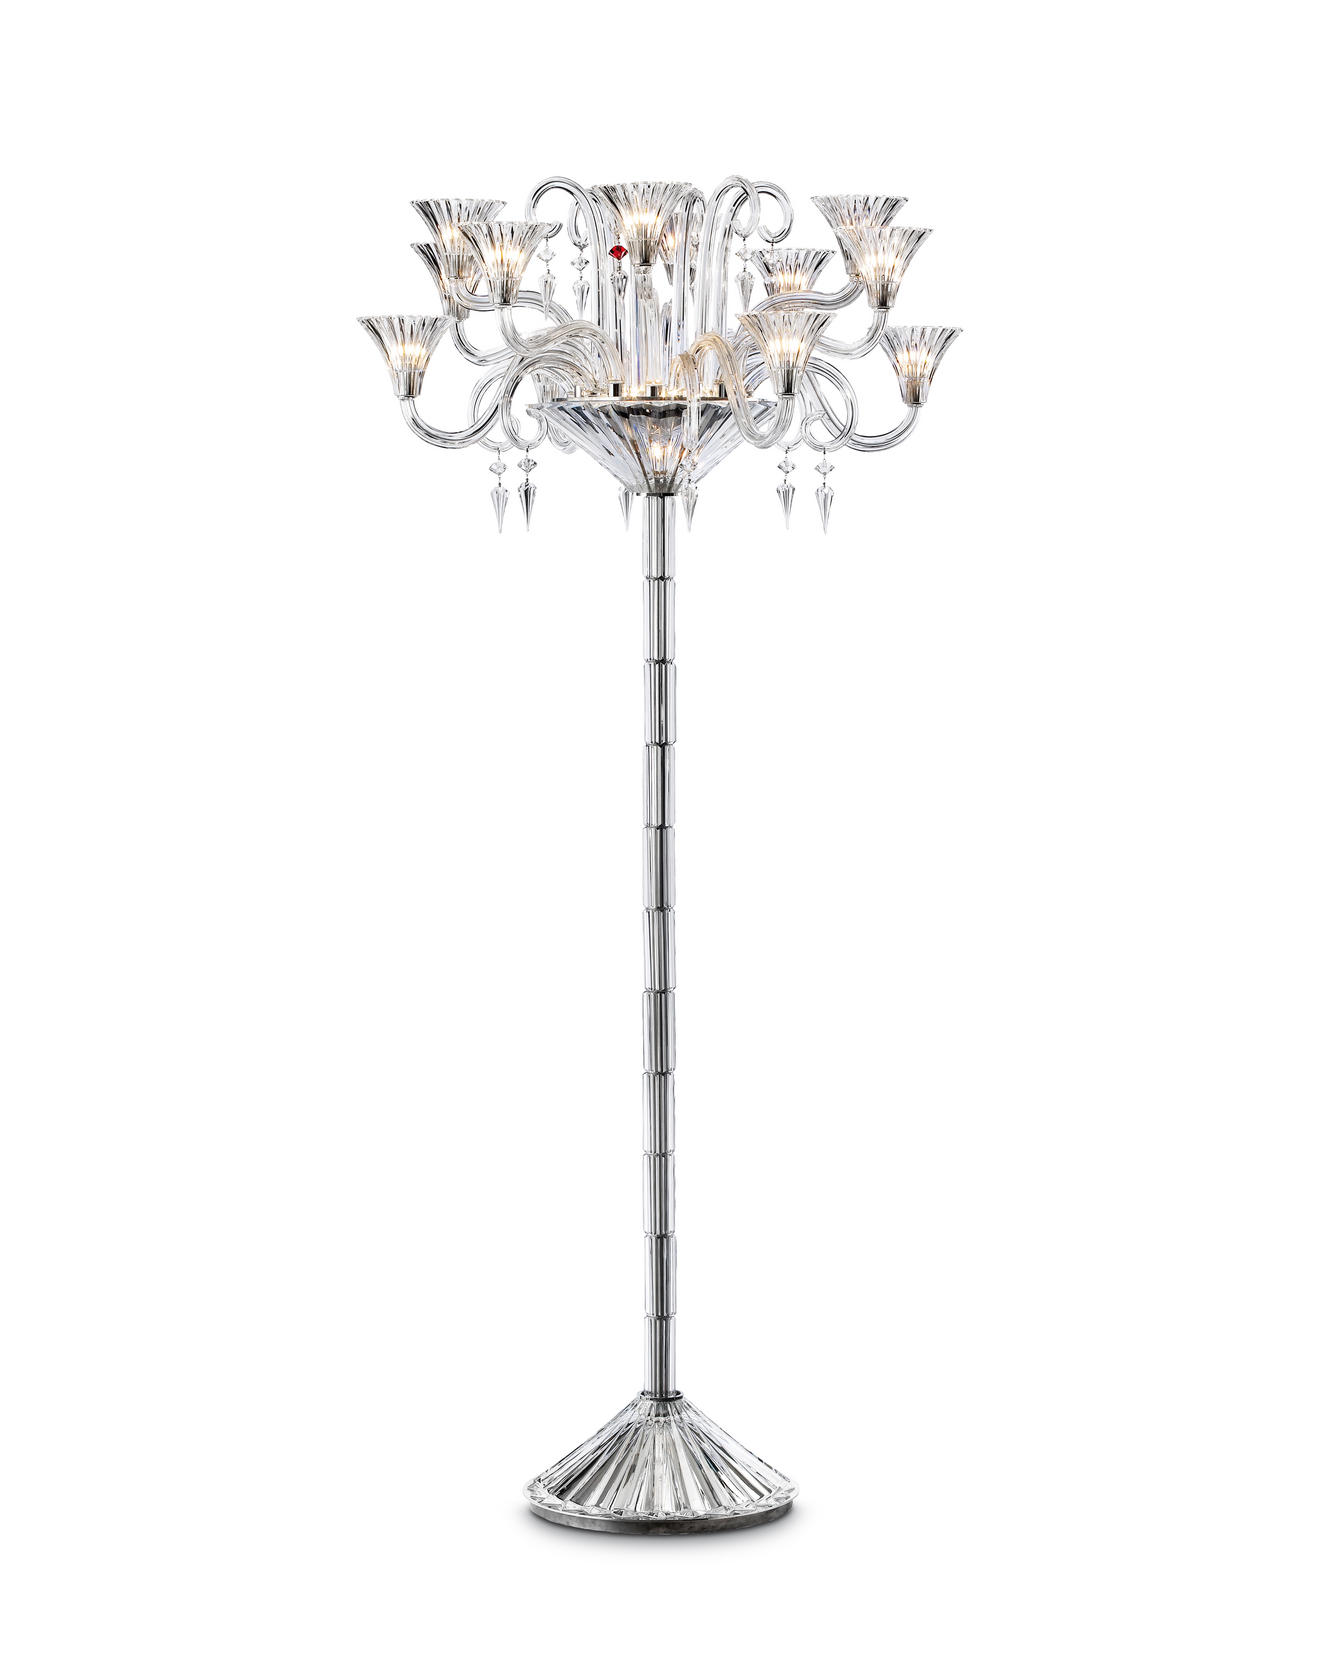 Lamp by Baccarat (baccarat.com)